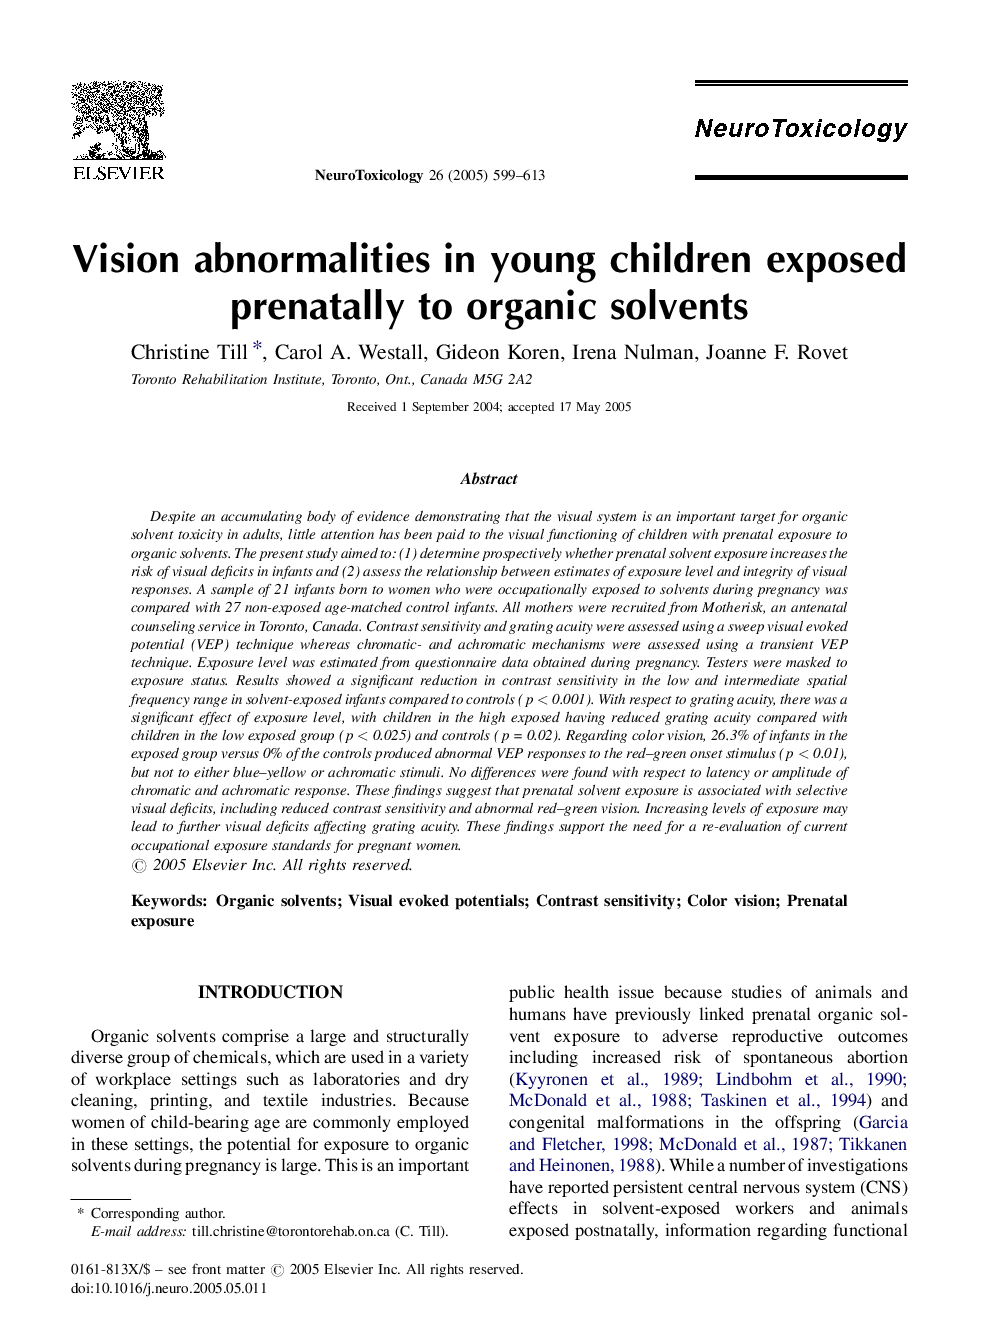 Vision abnormalities in young children exposed prenatally to organic solvents